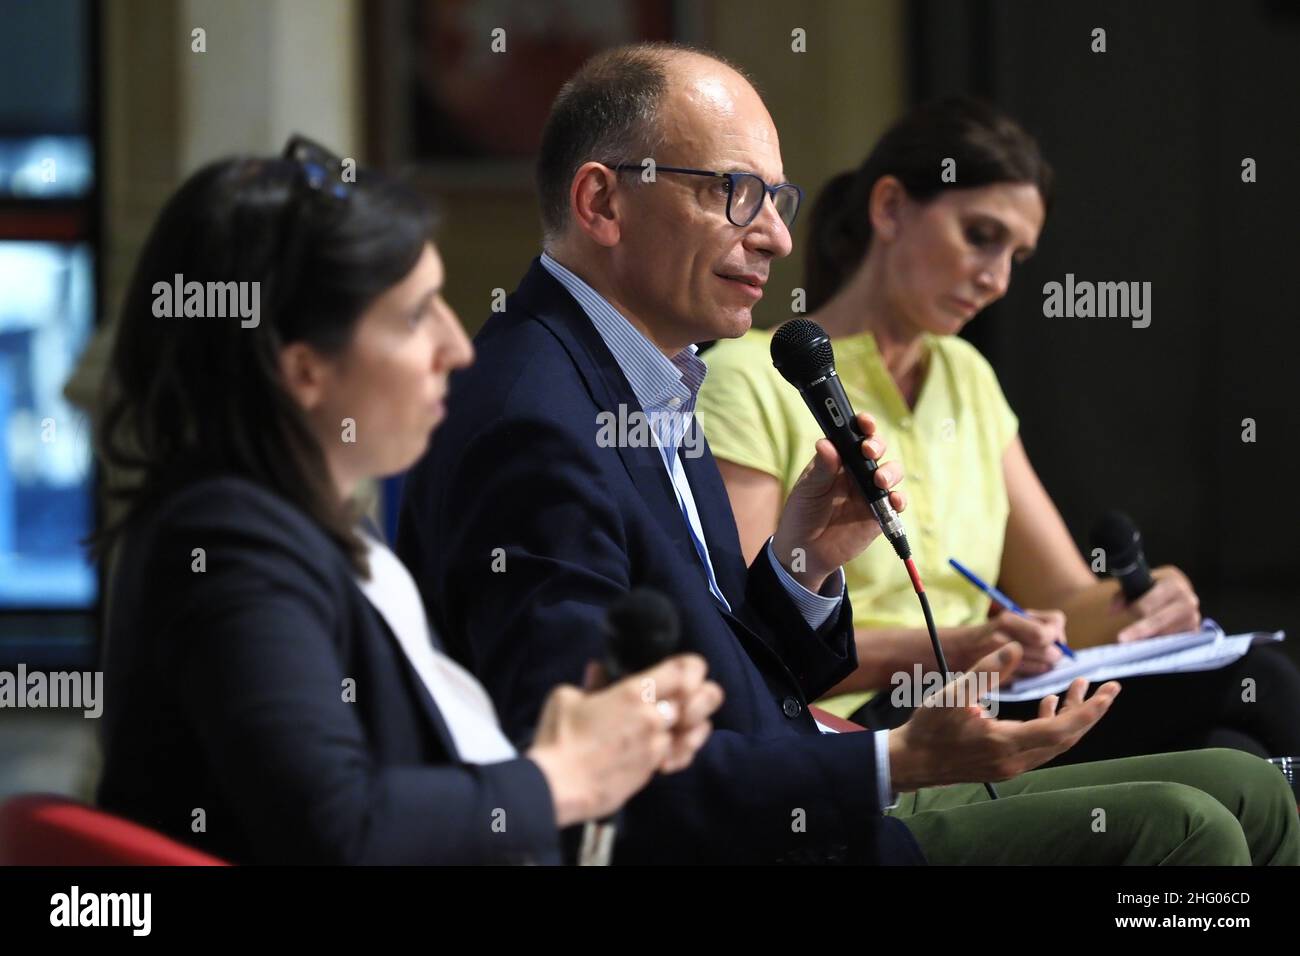 Michele Nucci/LaPresse June 29, 2021 - Bologna, Italy - news in the pic: Presentation of the new book by the secretary of the PD Enrico Letta with vice president of the Emilia Romagna region Elly Schlein in the Sala Borsa Stock Photo